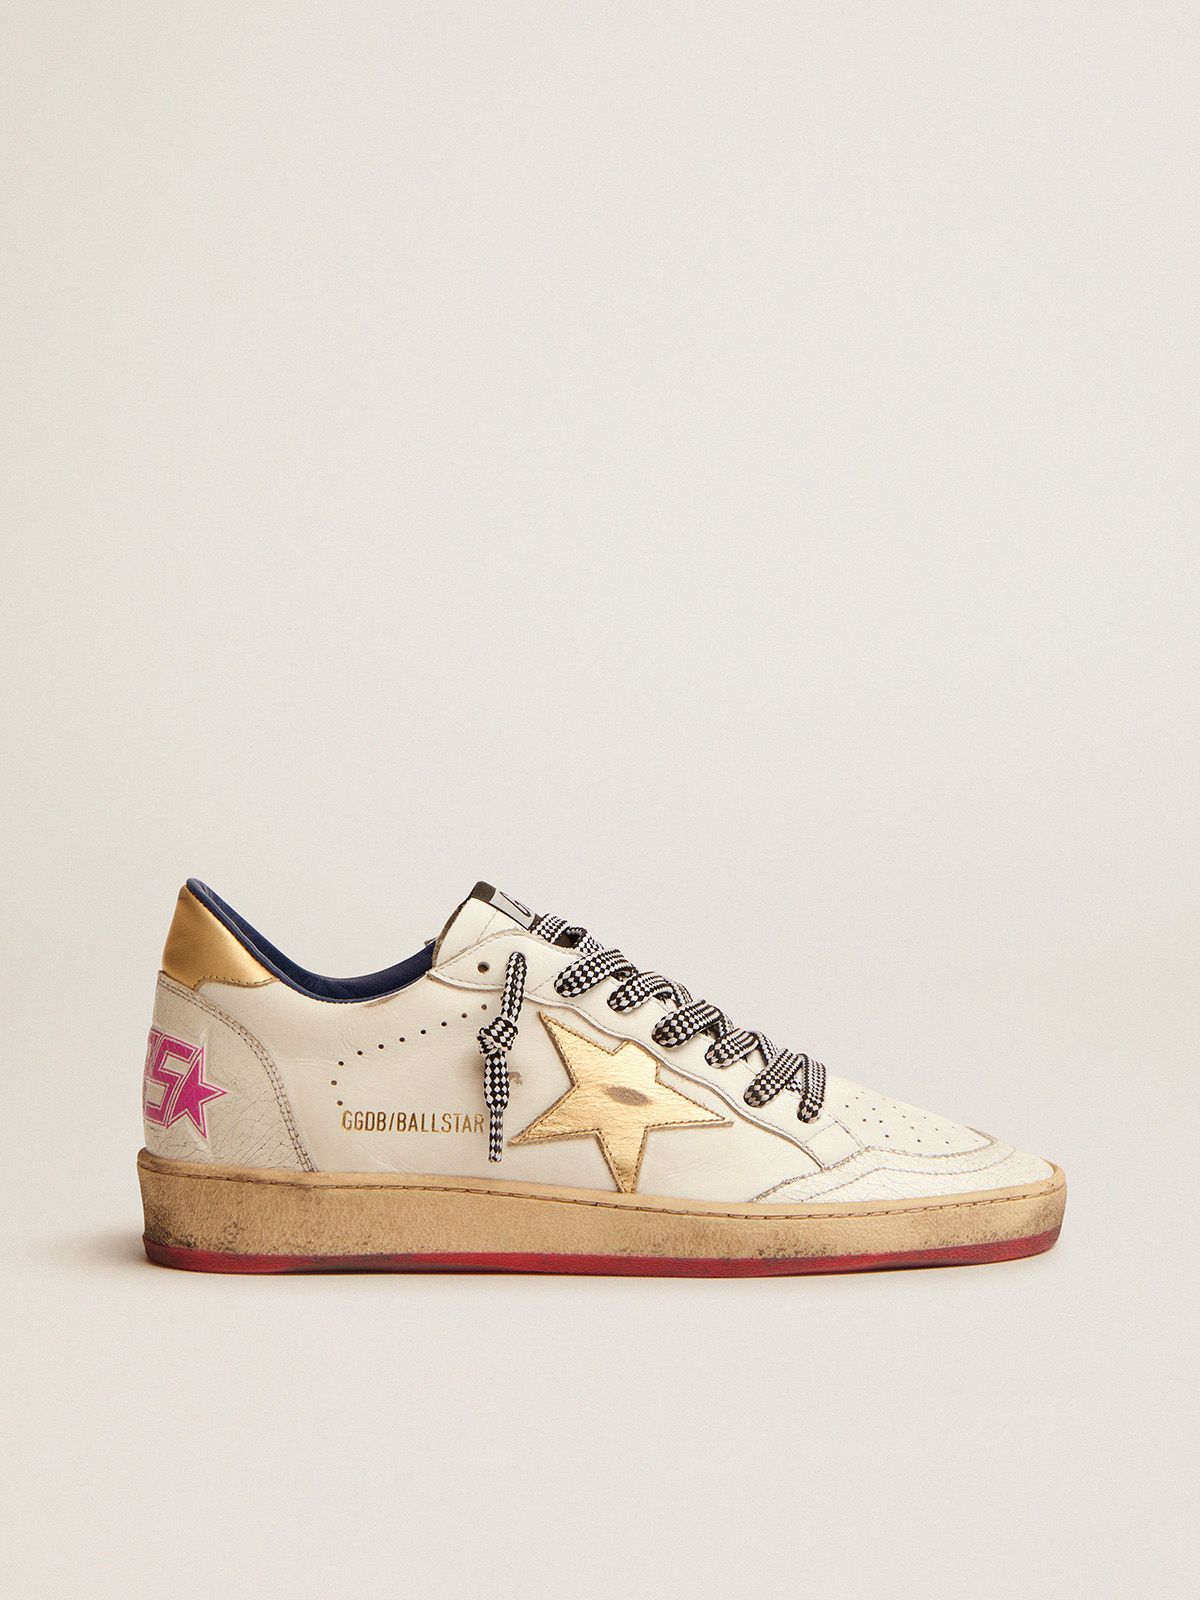 Ball Star LTD sneakers in white leather with gold laminated leather inserts | 